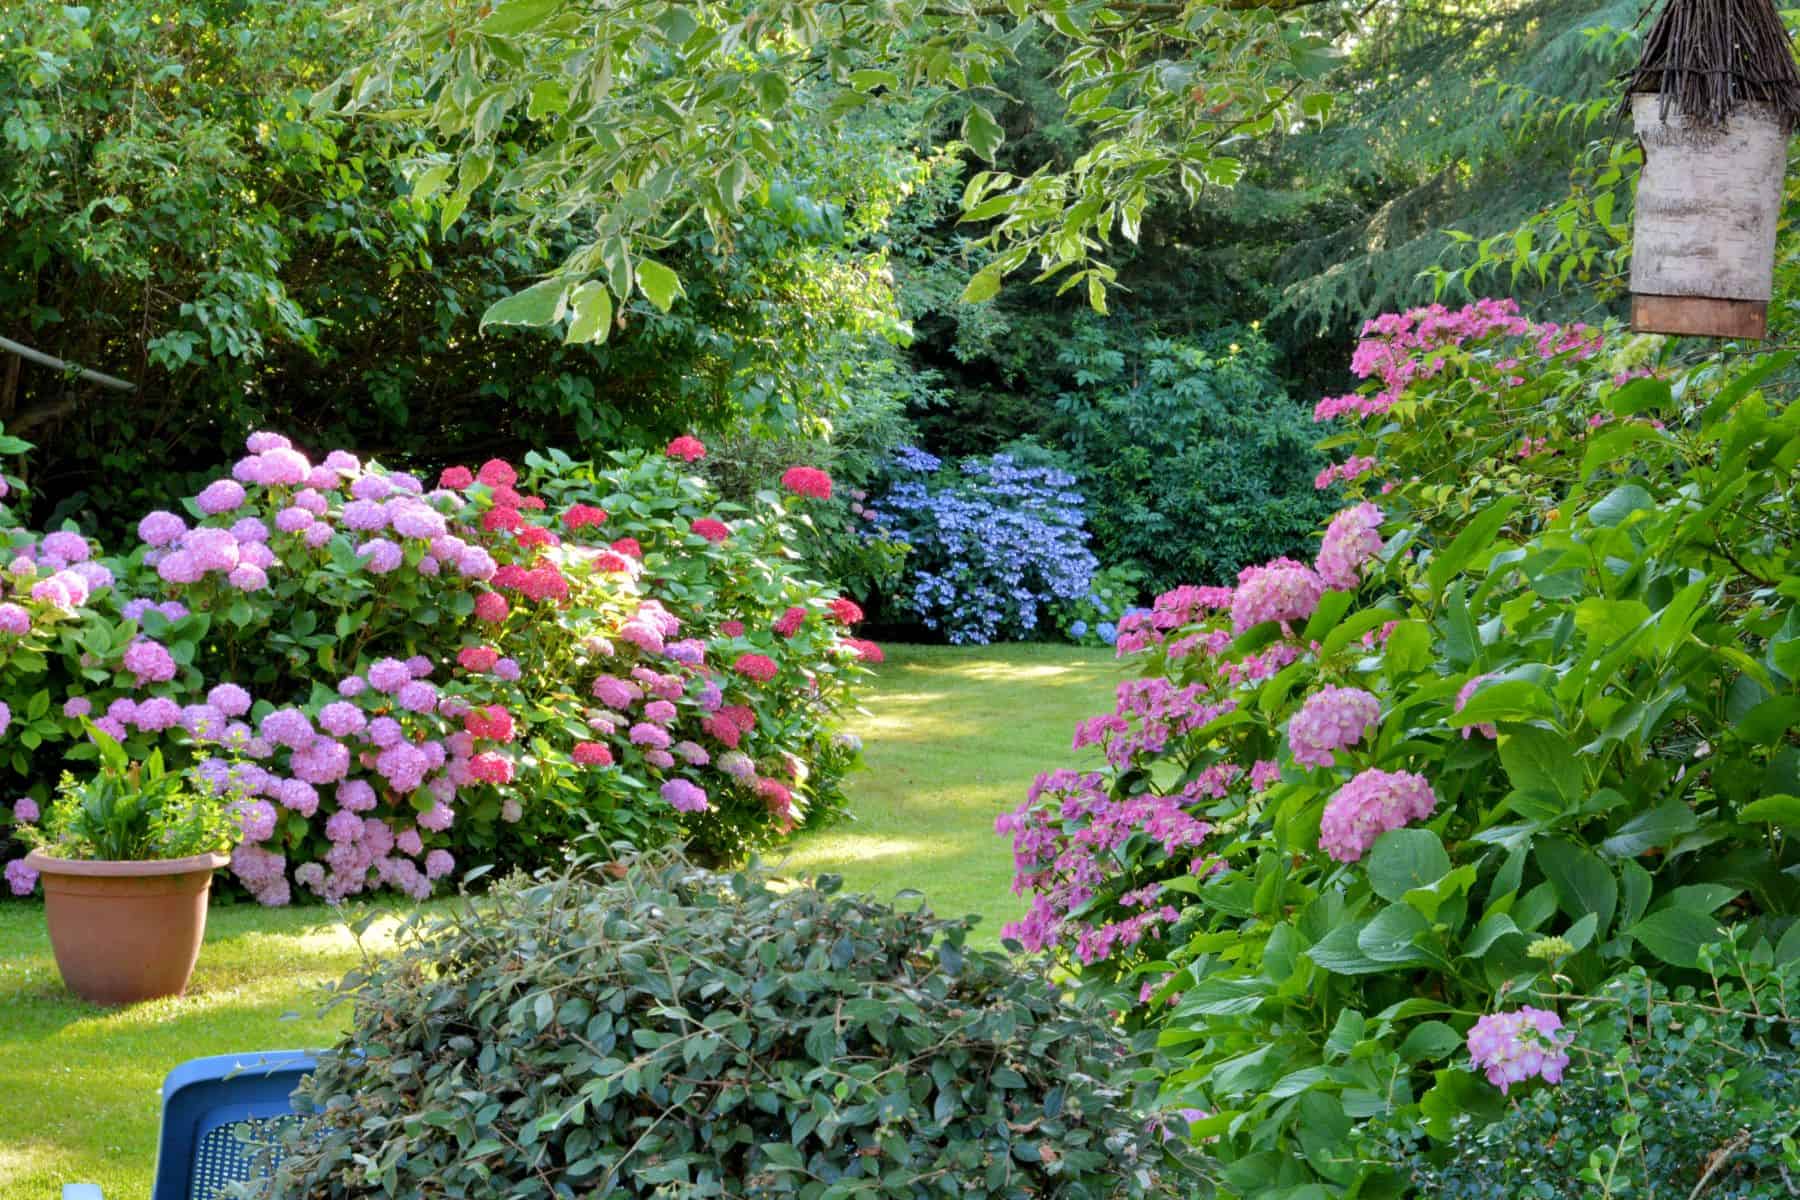 The perfect garden is whatever suits your personal style